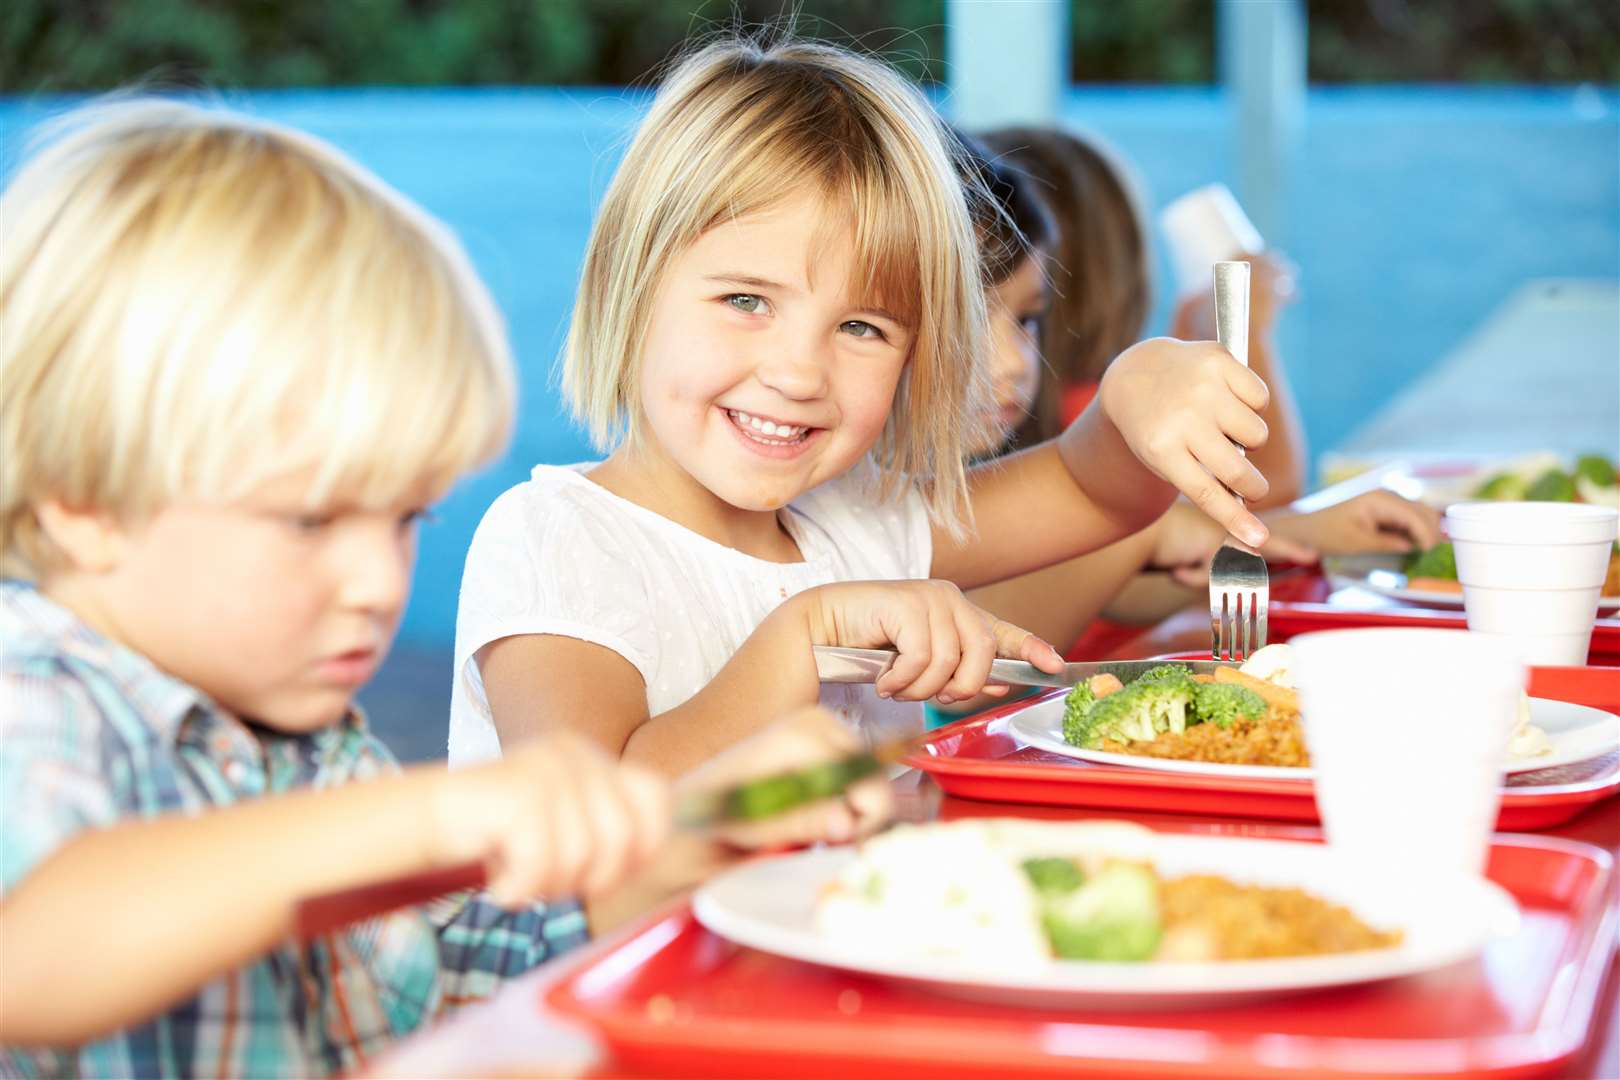 Meals will be free for eligible children.